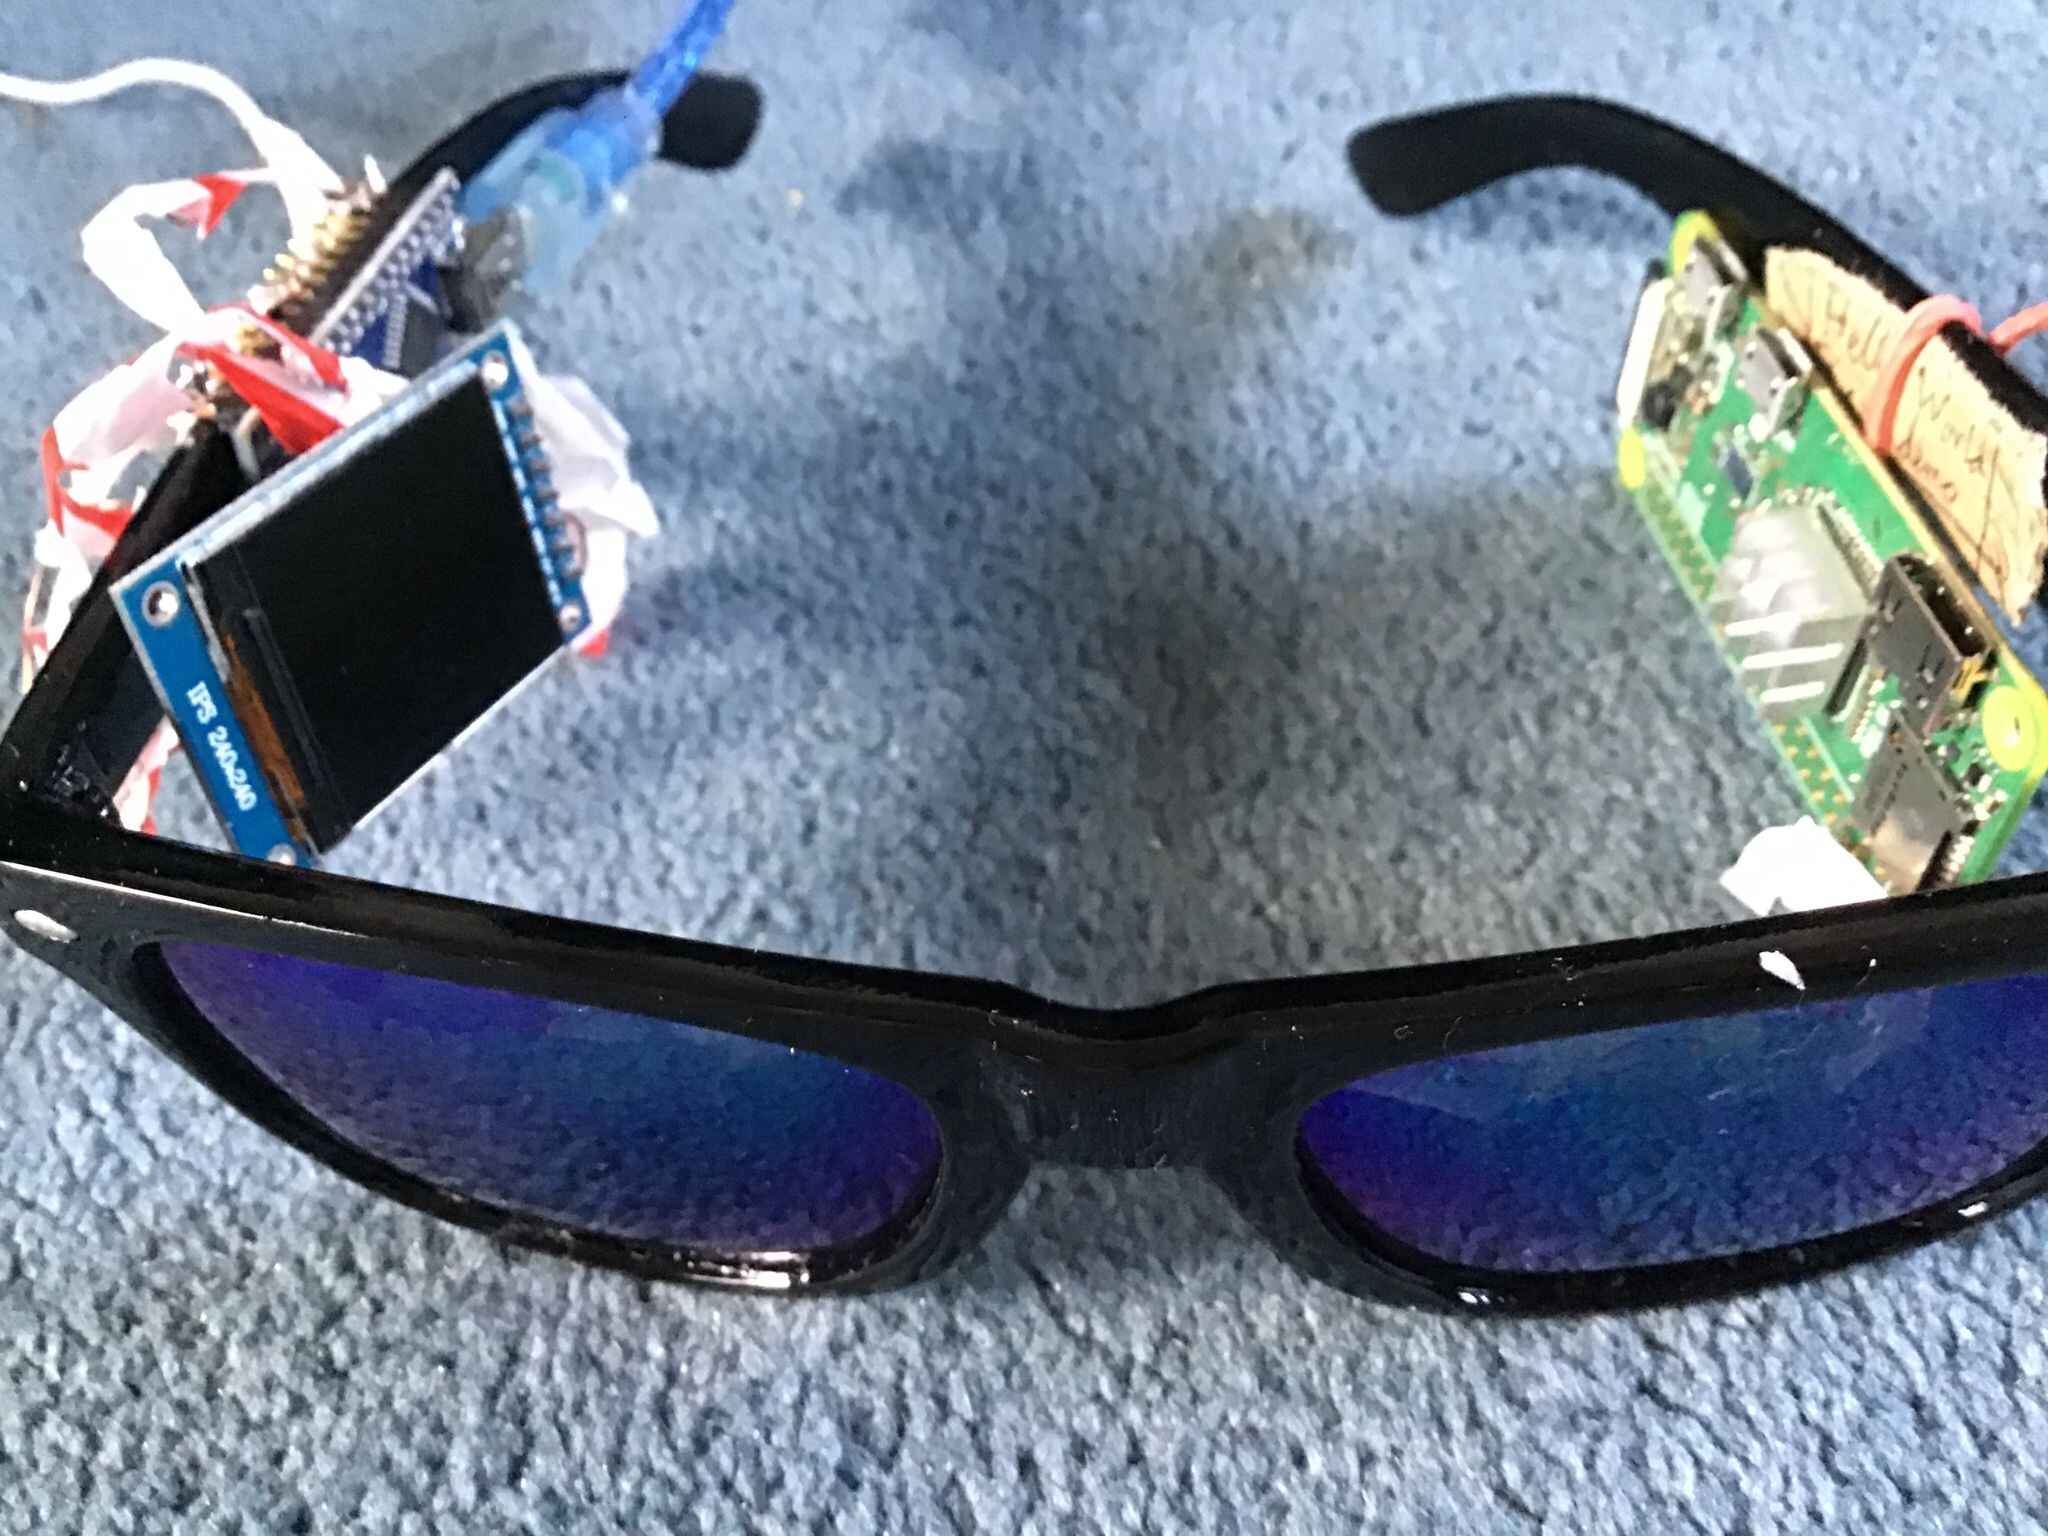 Components and design layout of smart E-glasses for healthcare